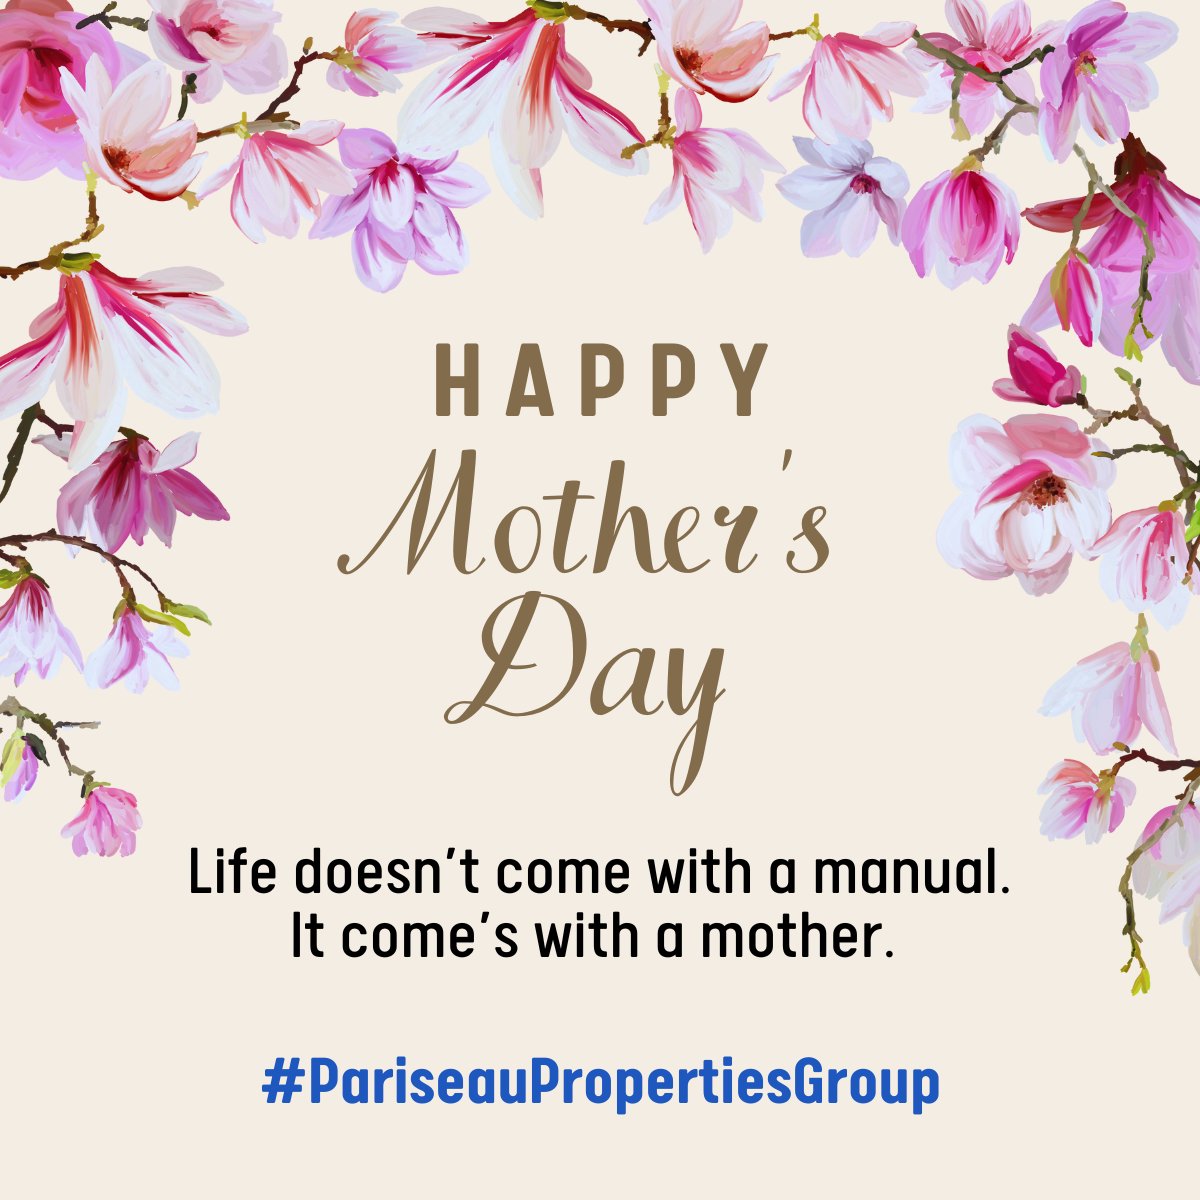 💐  To all the moms & mother figures who've touched our hearts & shaped our lives - we see you, we appreciate you, & we celebrate you. 💐
#Mothers #Mothersday #happyMothersday #family #MOM #HOME #LOVE #momlove #homegoals #realtors #PariseauPropertiesGroup #C21NorthEast #theDSGal